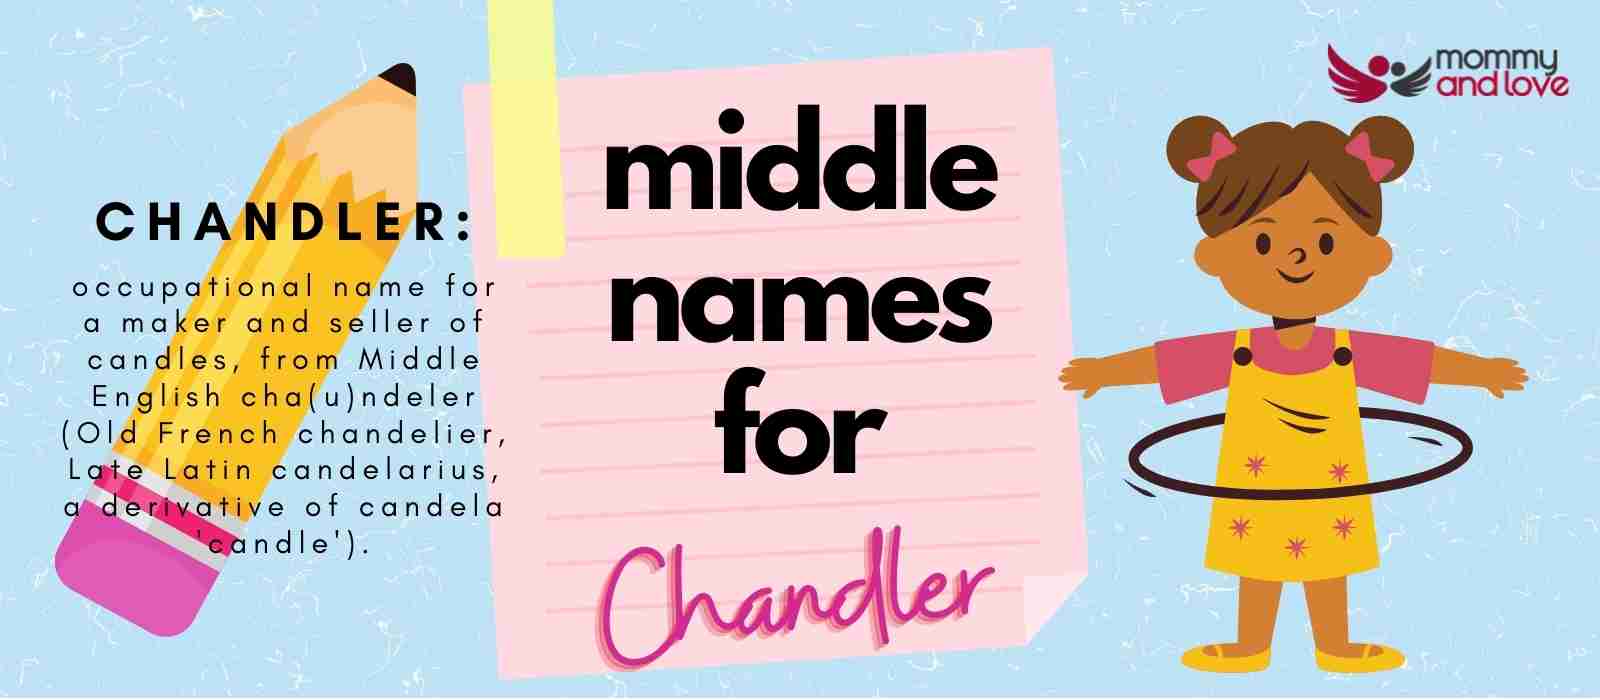 Middle Names for Chandler